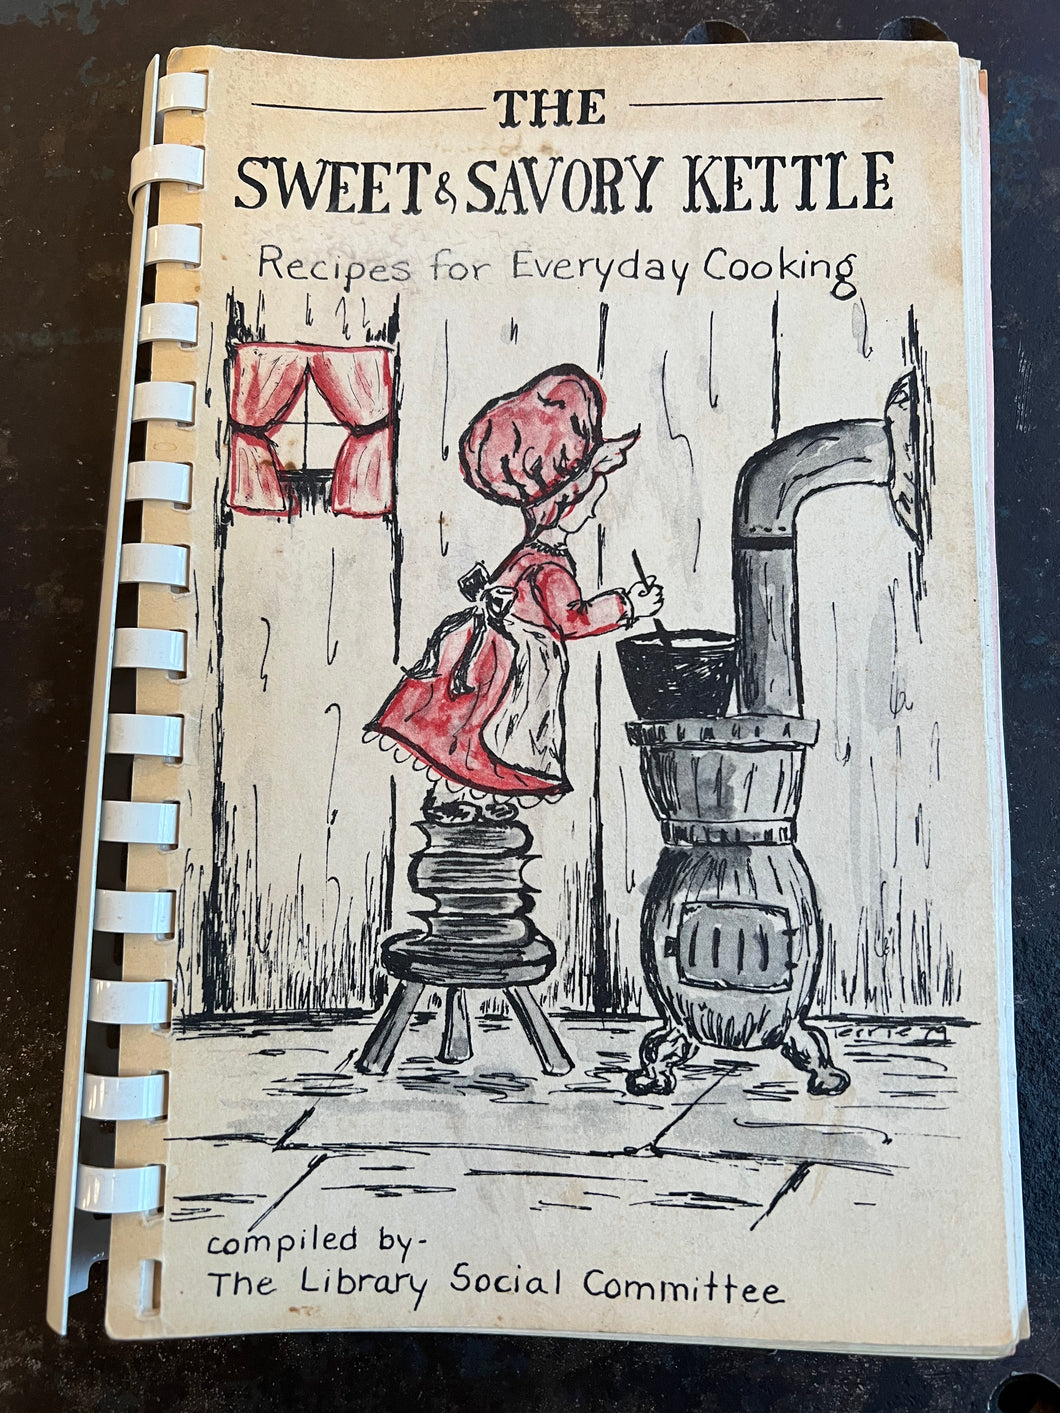 The Sweet & Savory Kettle, Compiled by the Library Social Committee